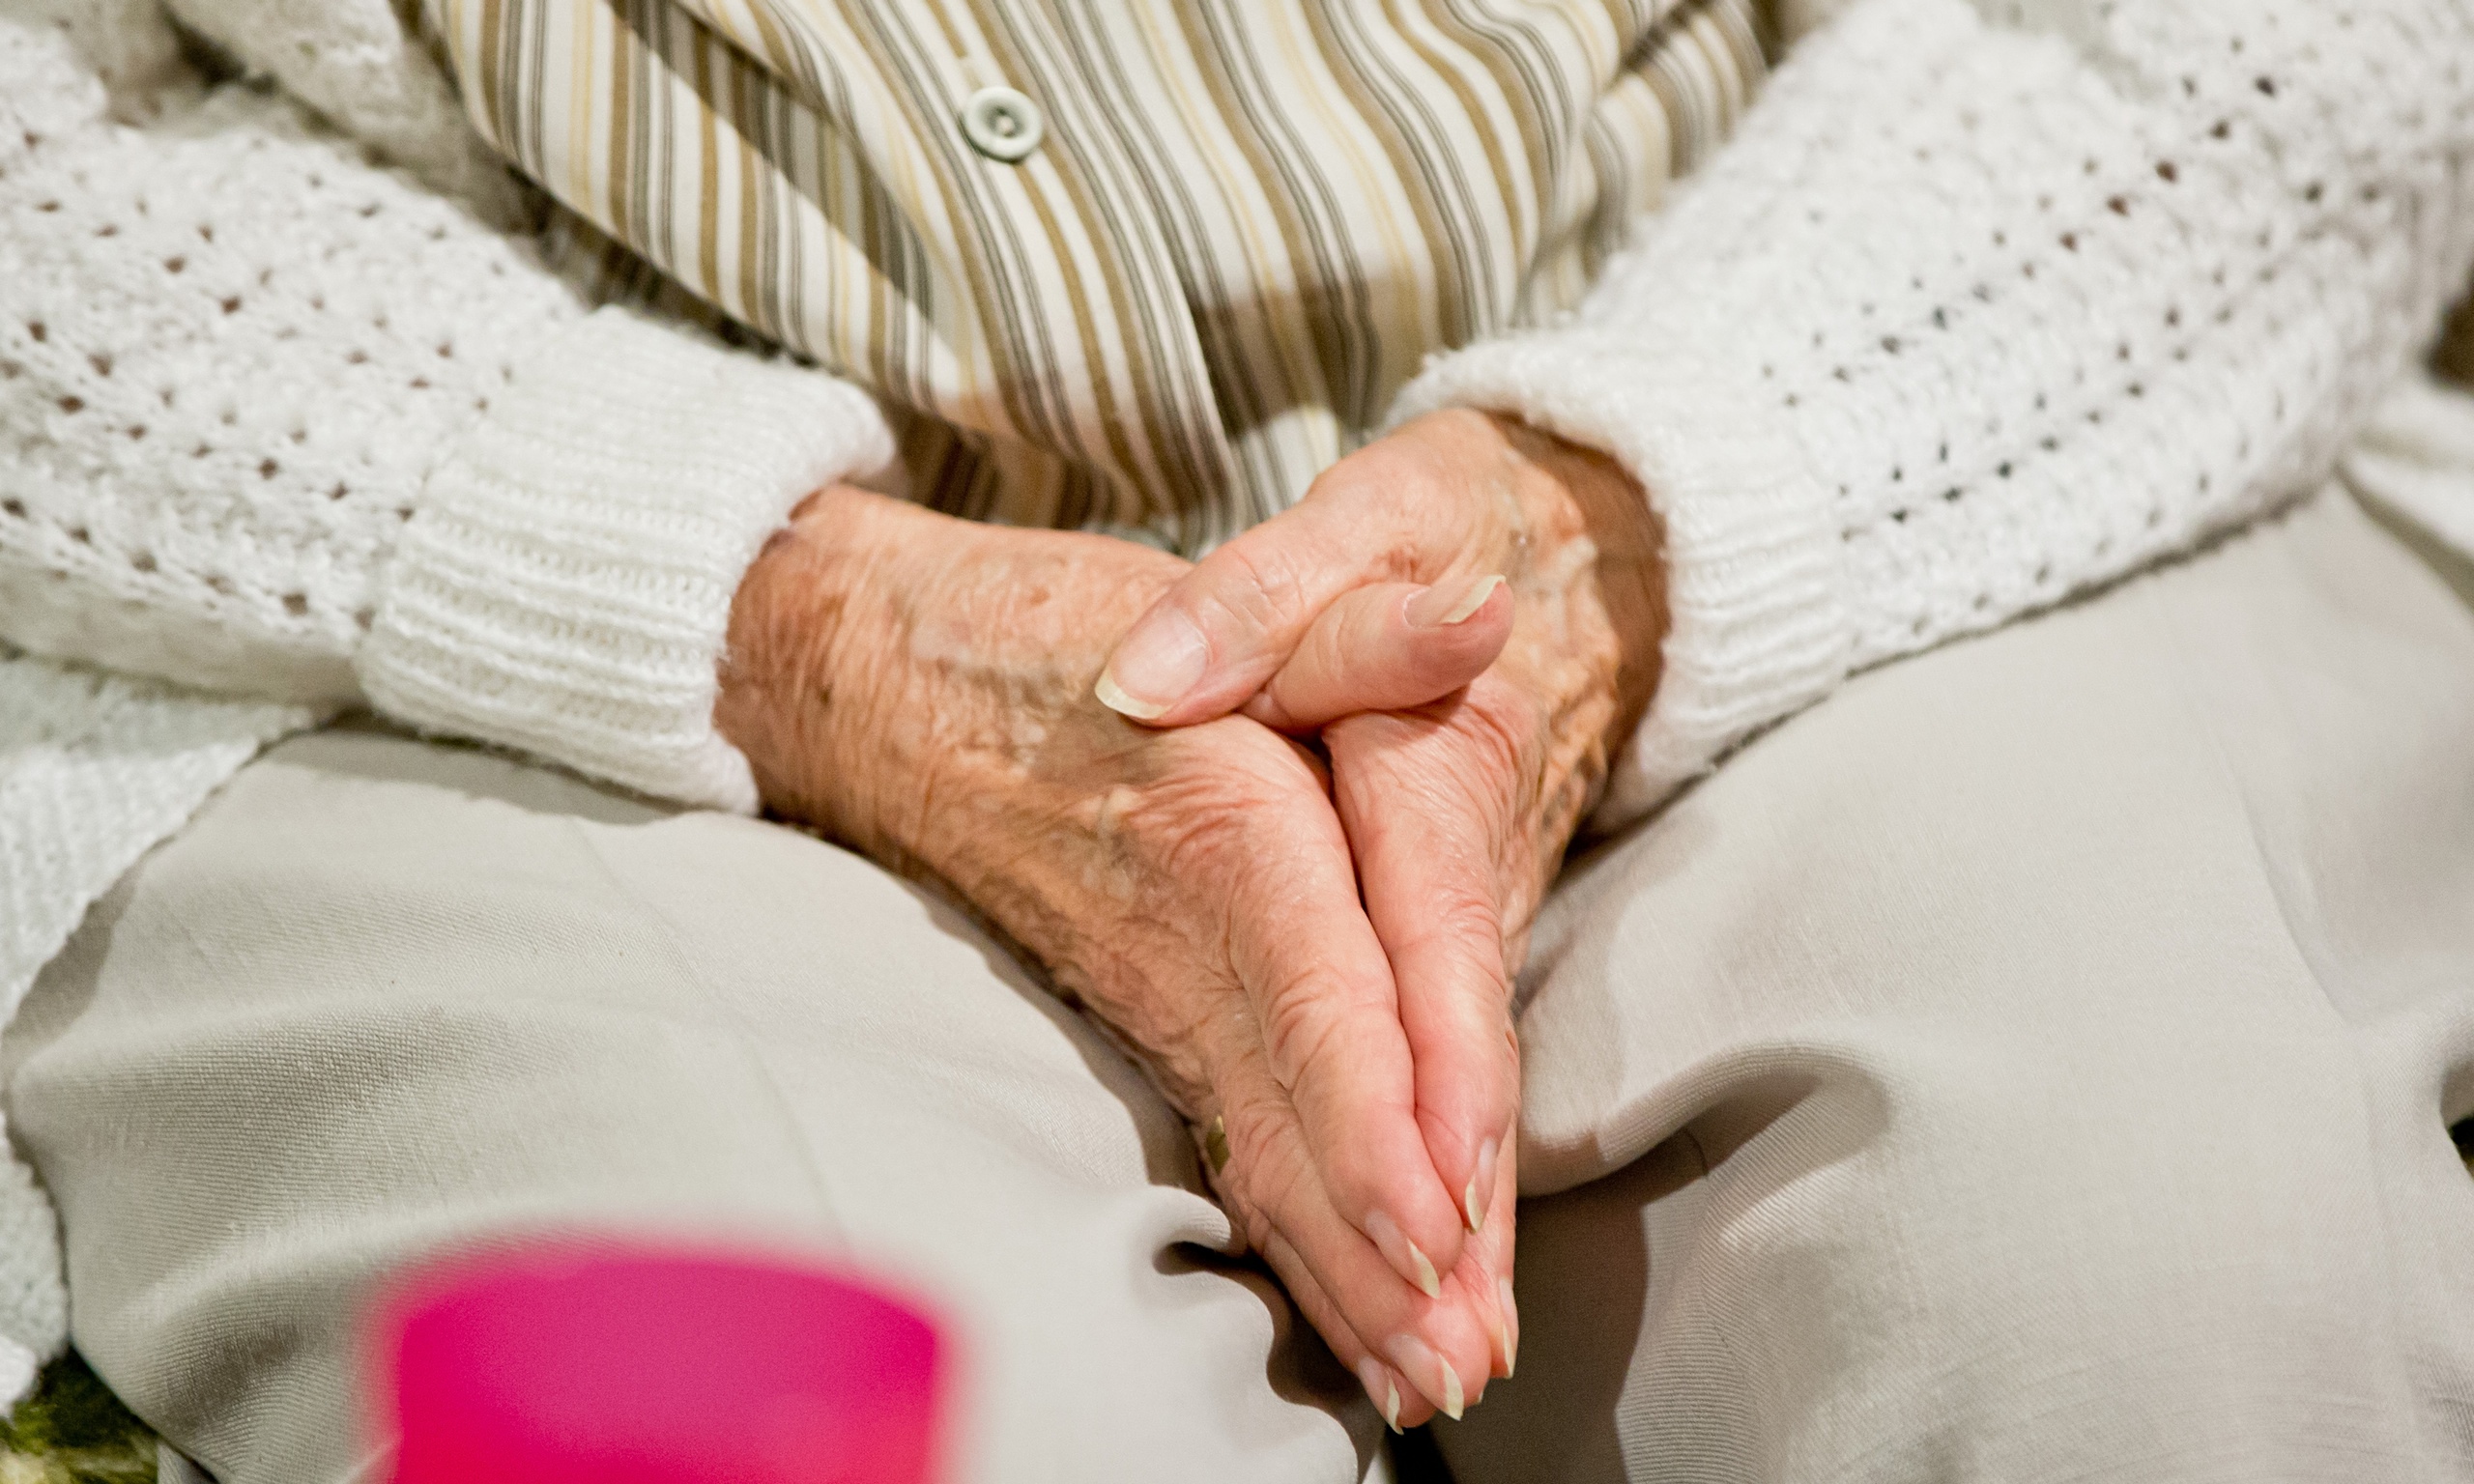 Older Patients And Families Forced To Pay Dementia Tax Says Uk